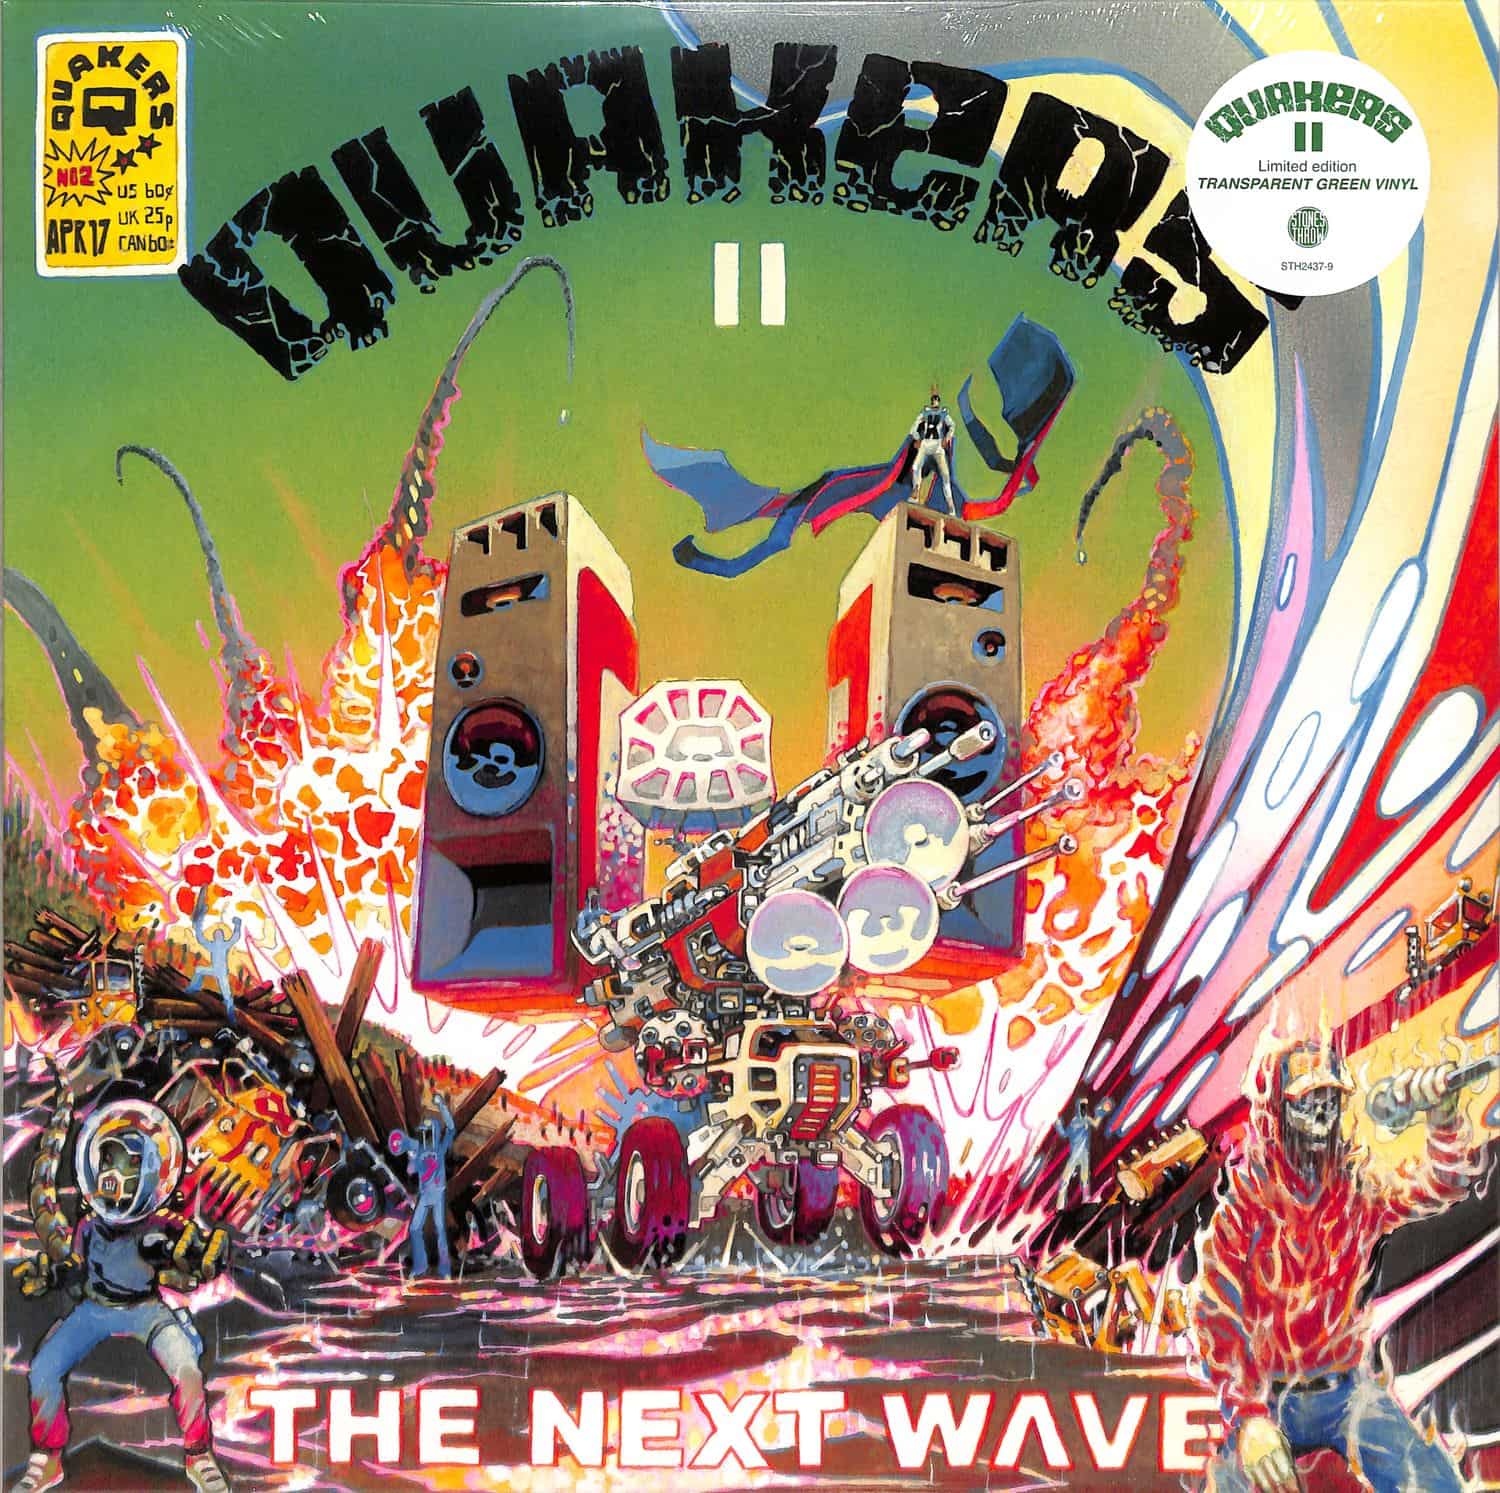 Quakers - II - THE NEW WAVE 